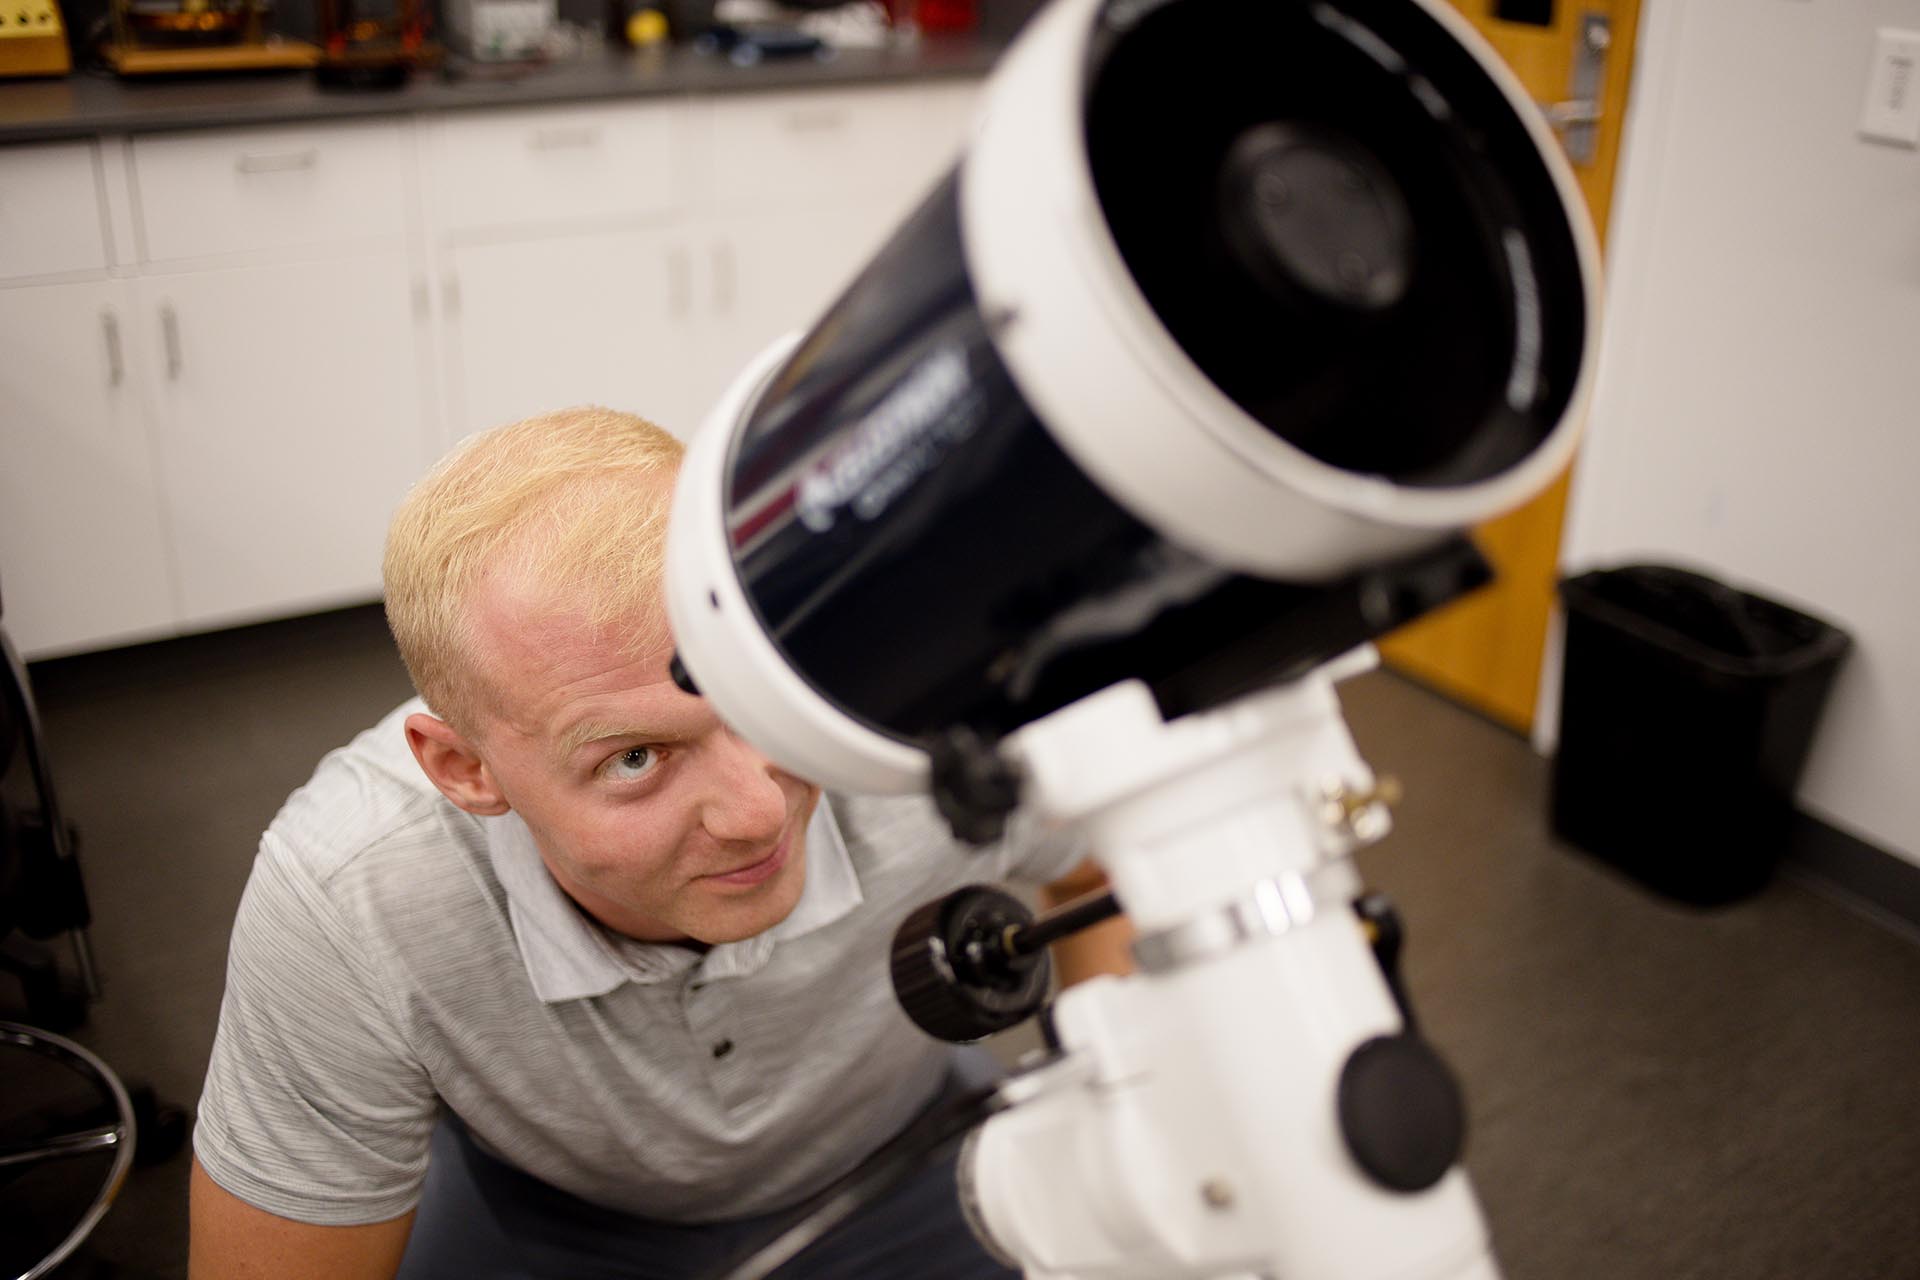 MSU Denver student Cody Ward takes a look in the Celestron Omni XLT 127 Telescope in the Physics Laboratory